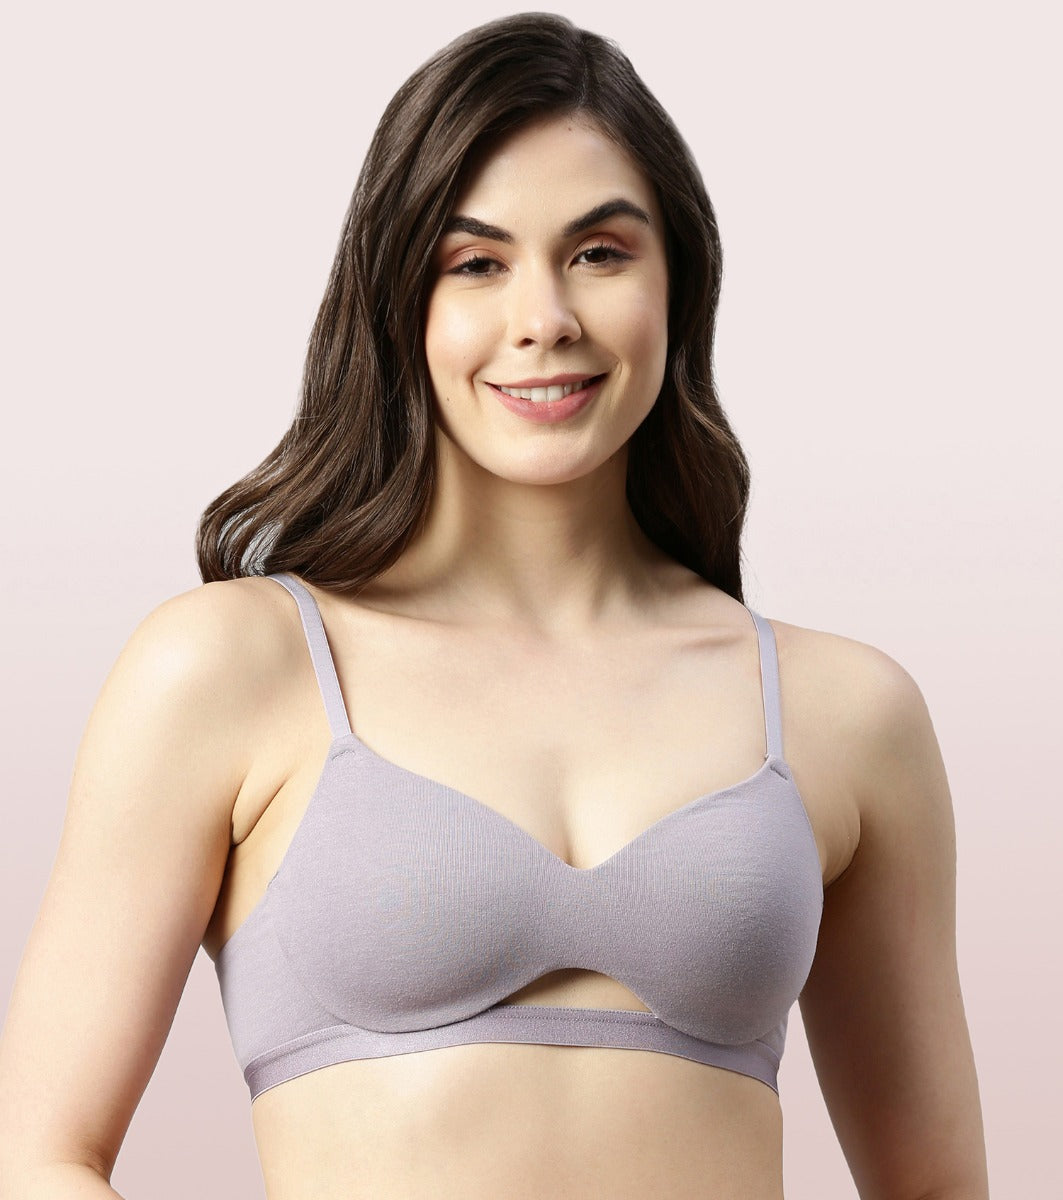 Enamor CloudSoft A032 Invisible Neckline Cotton T-shirt Bra for Women- Medium Coverage, Padded and Wirefree - Silver Lilac